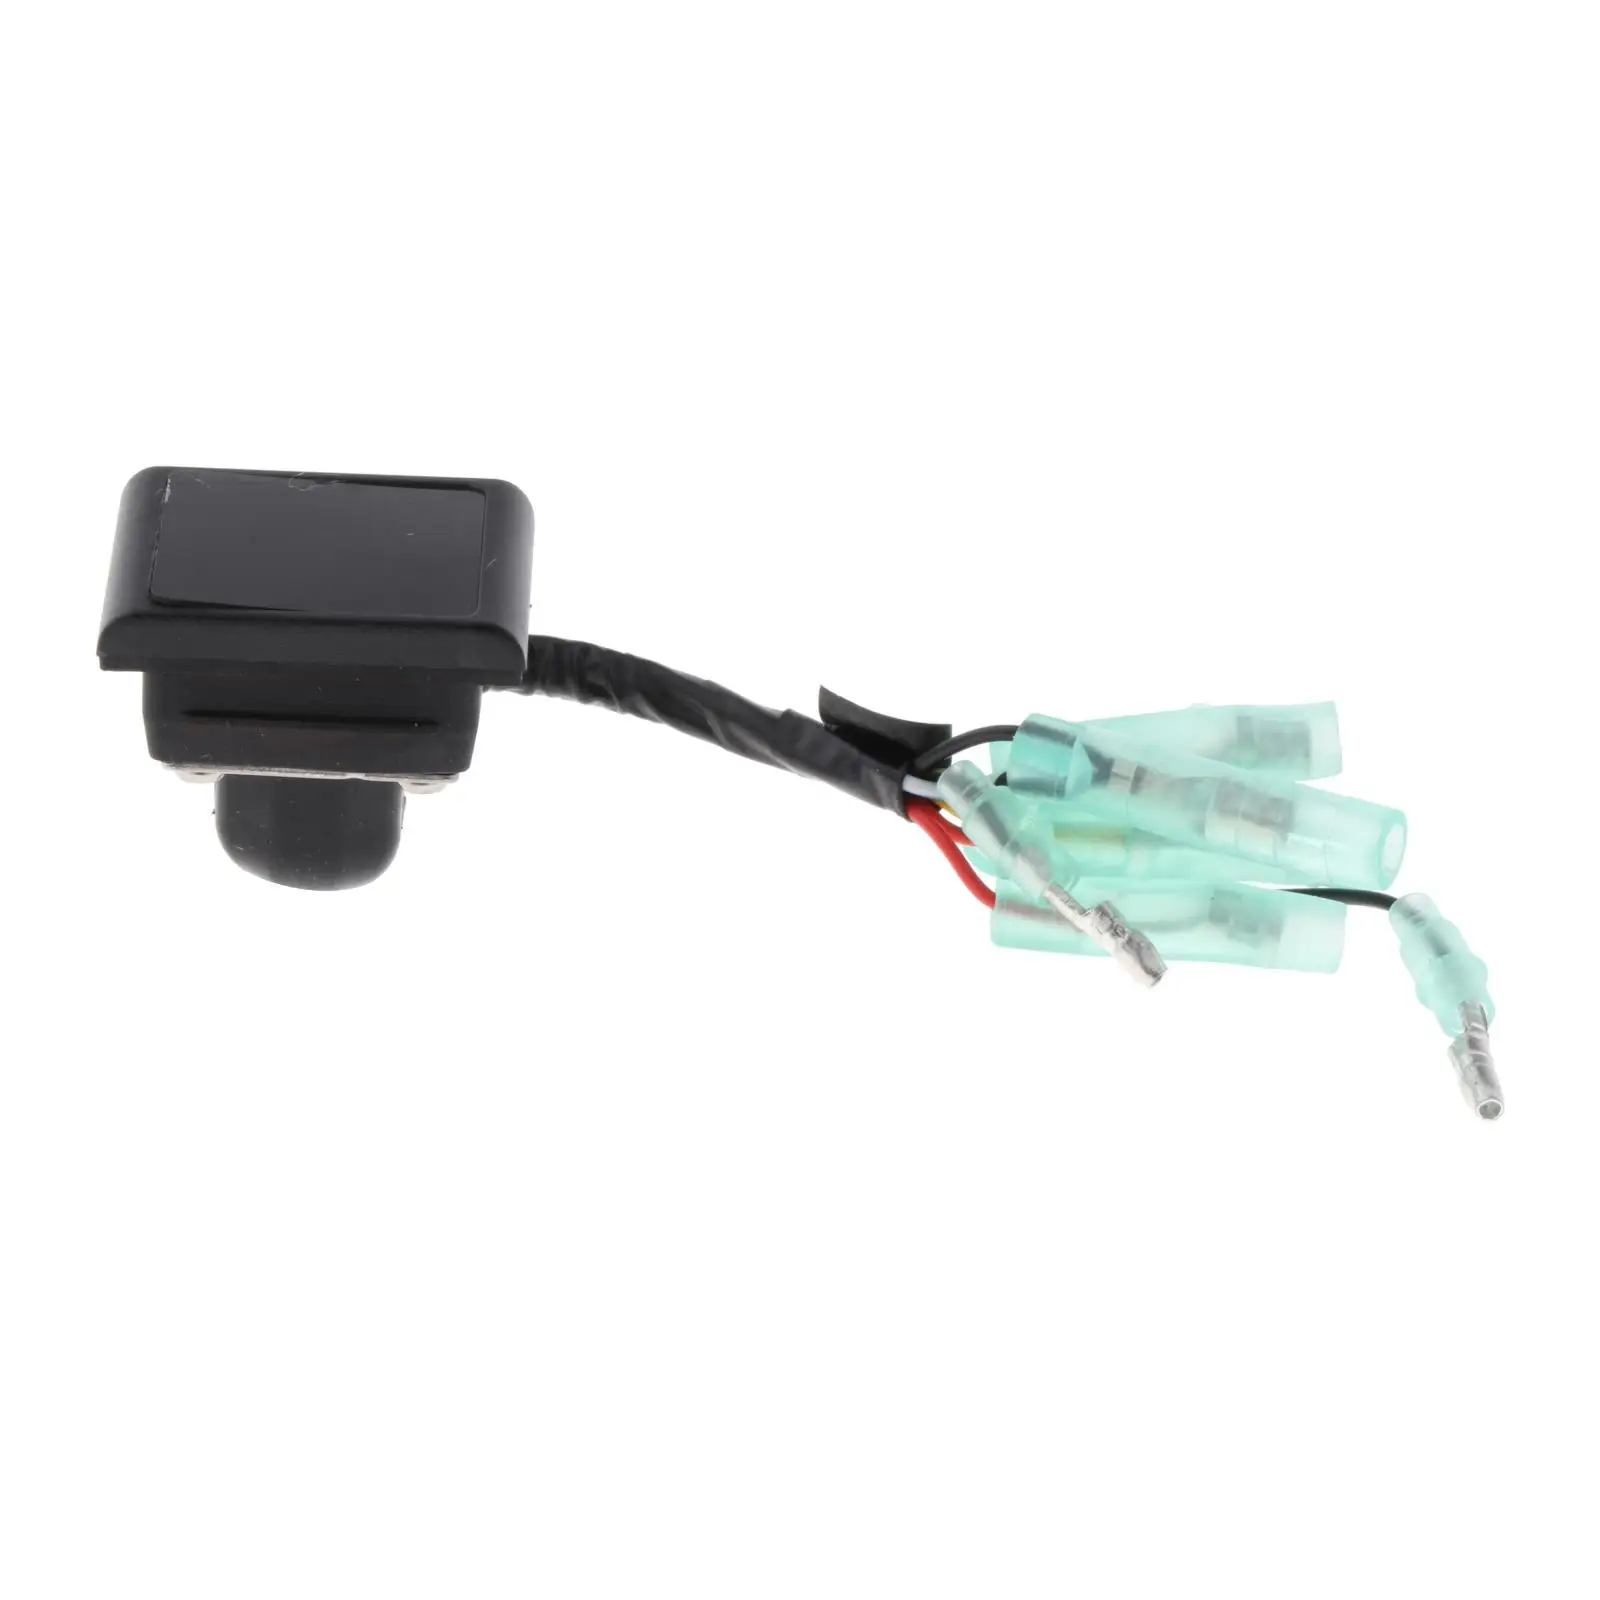 37210-Zz5-762 Direct Replaces 37210Zz5762 4 LED Lamp Assy Assembly Fit for Honda Outboard Motor BF90 Control Box Professional